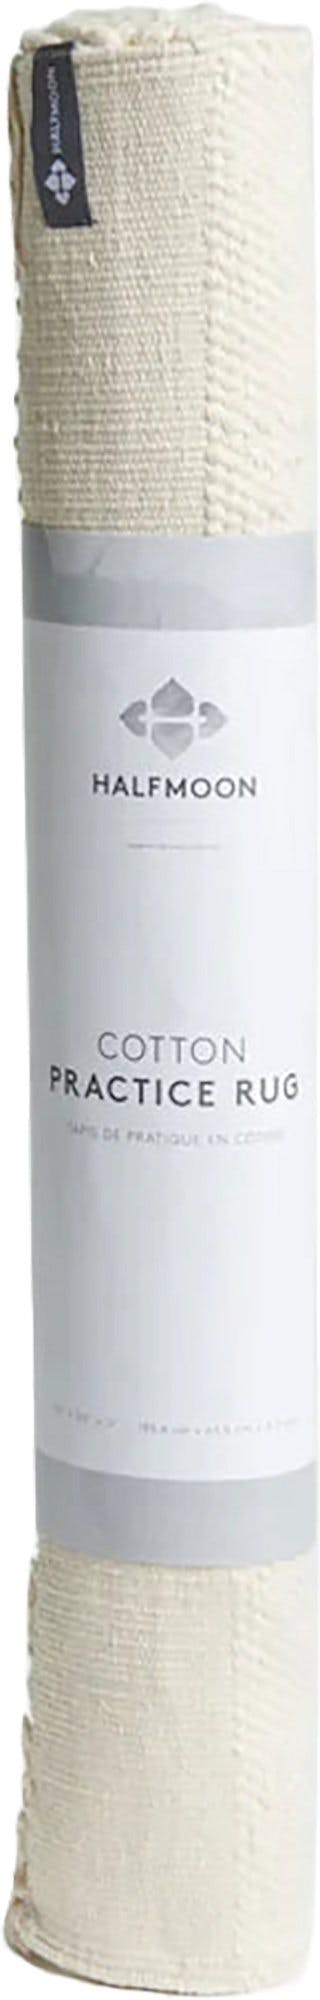 Product image for Cotton Practice Rug